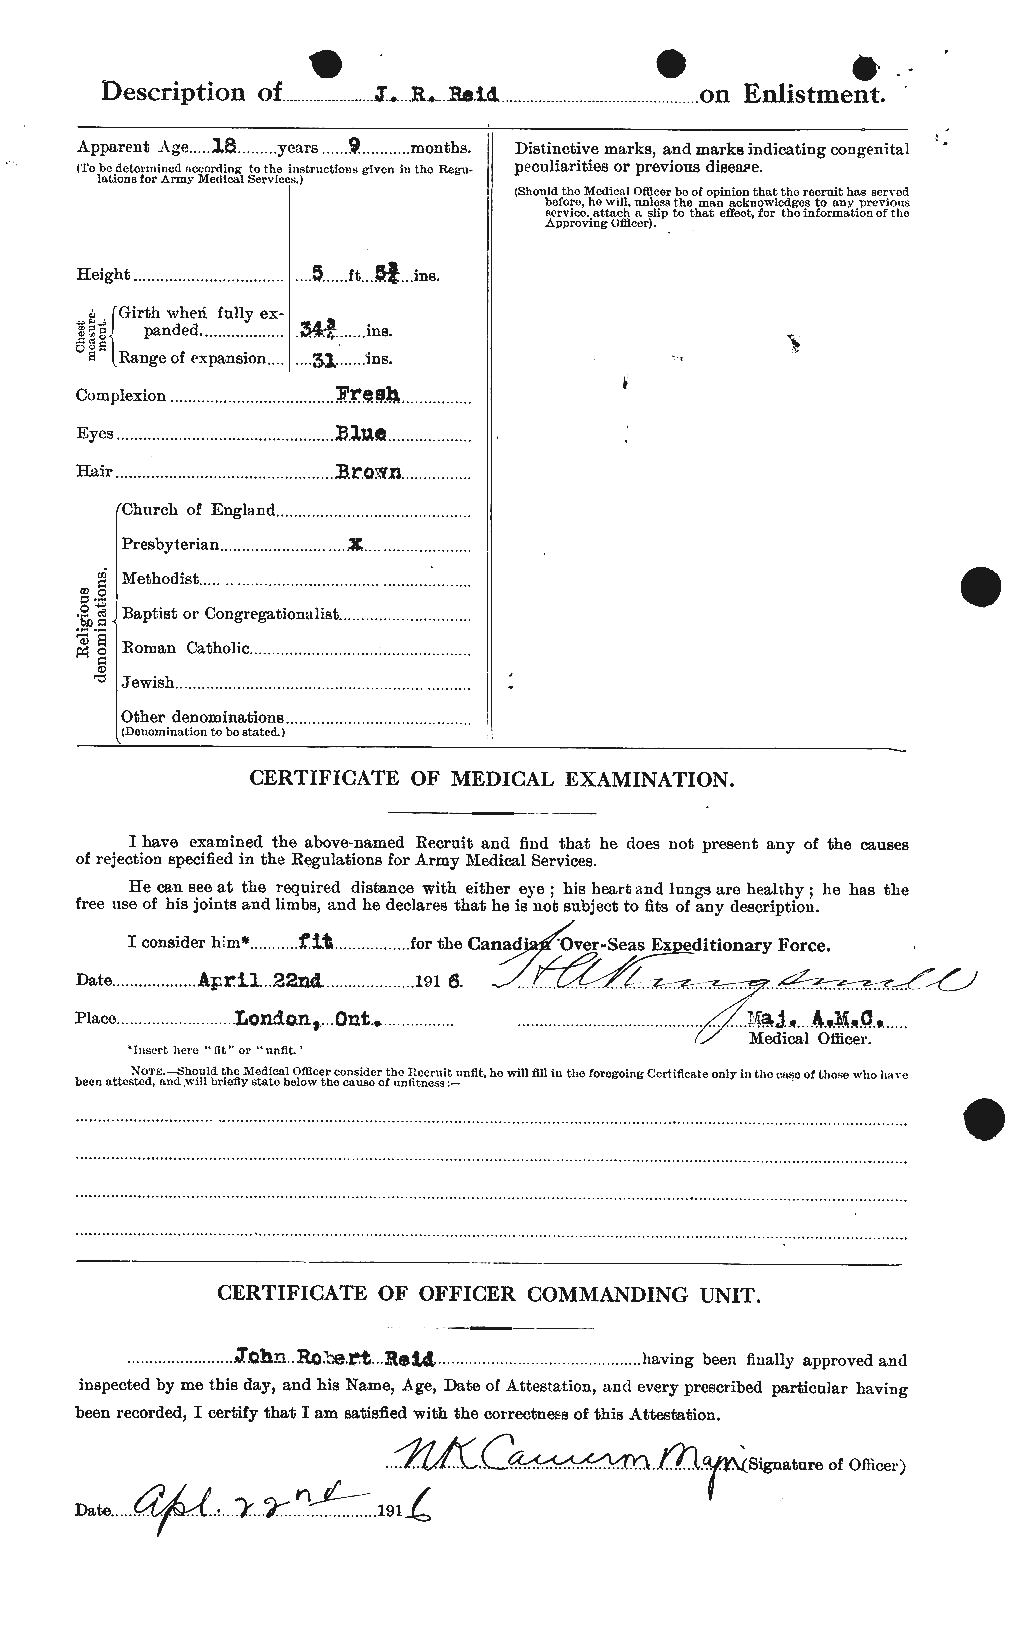 Personnel Records of the First World War - CEF 598864b